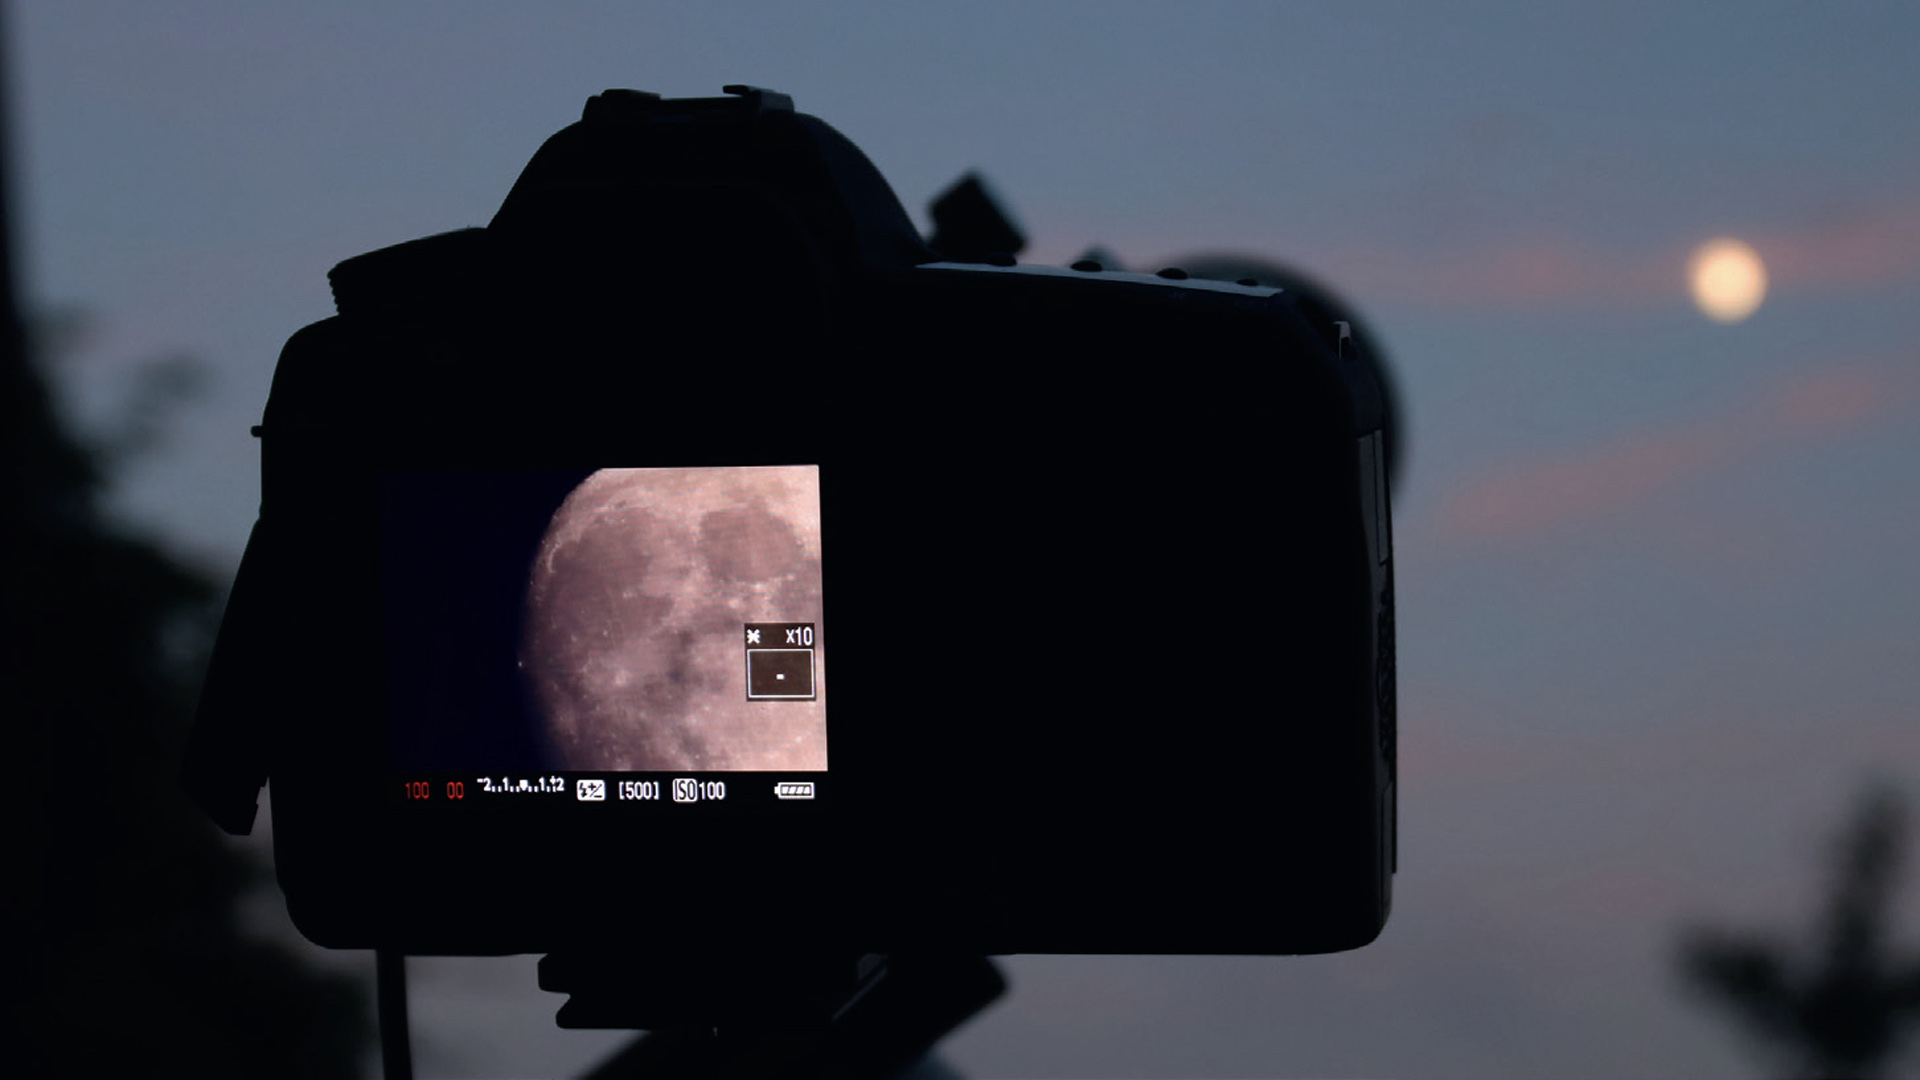 Photographing the Moon with a DSLR attached to a telescope. The Moon is focused using live view
on the camera display. M. Weigand
